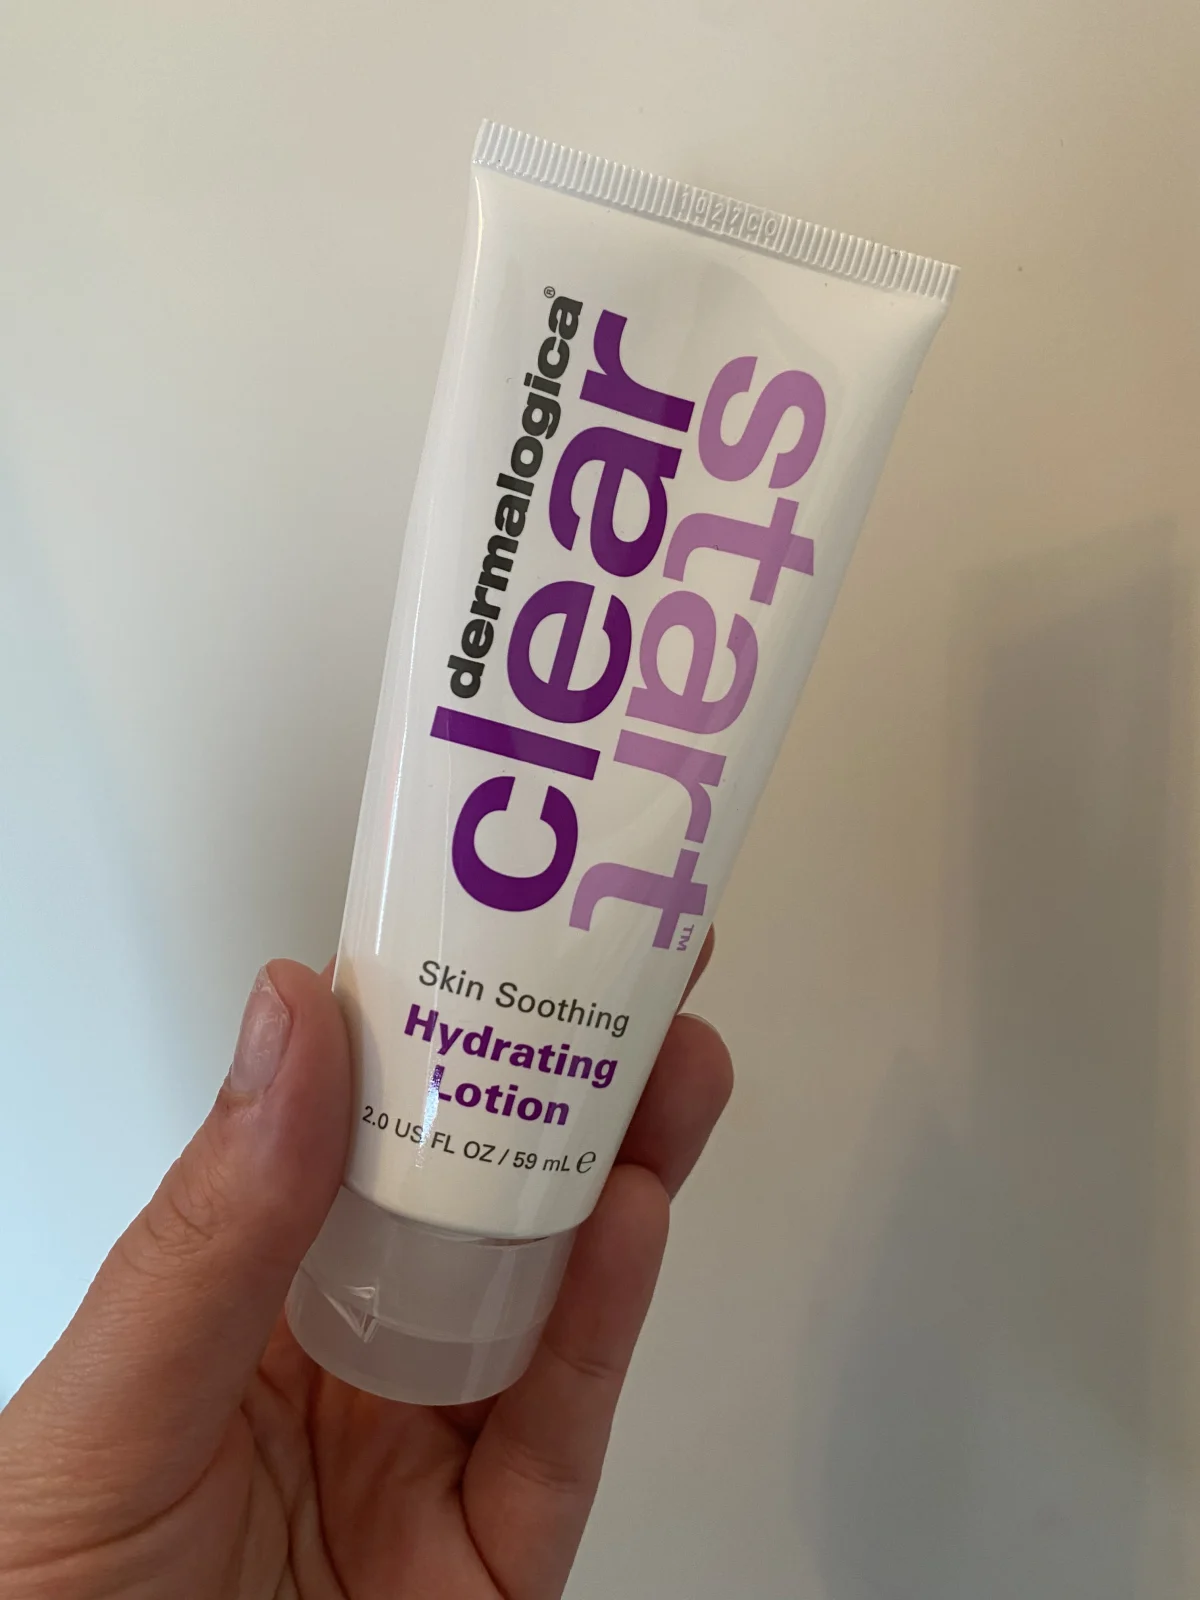 Dermalogica Clear Start Skin Soothing Hydrating Lotion - review image